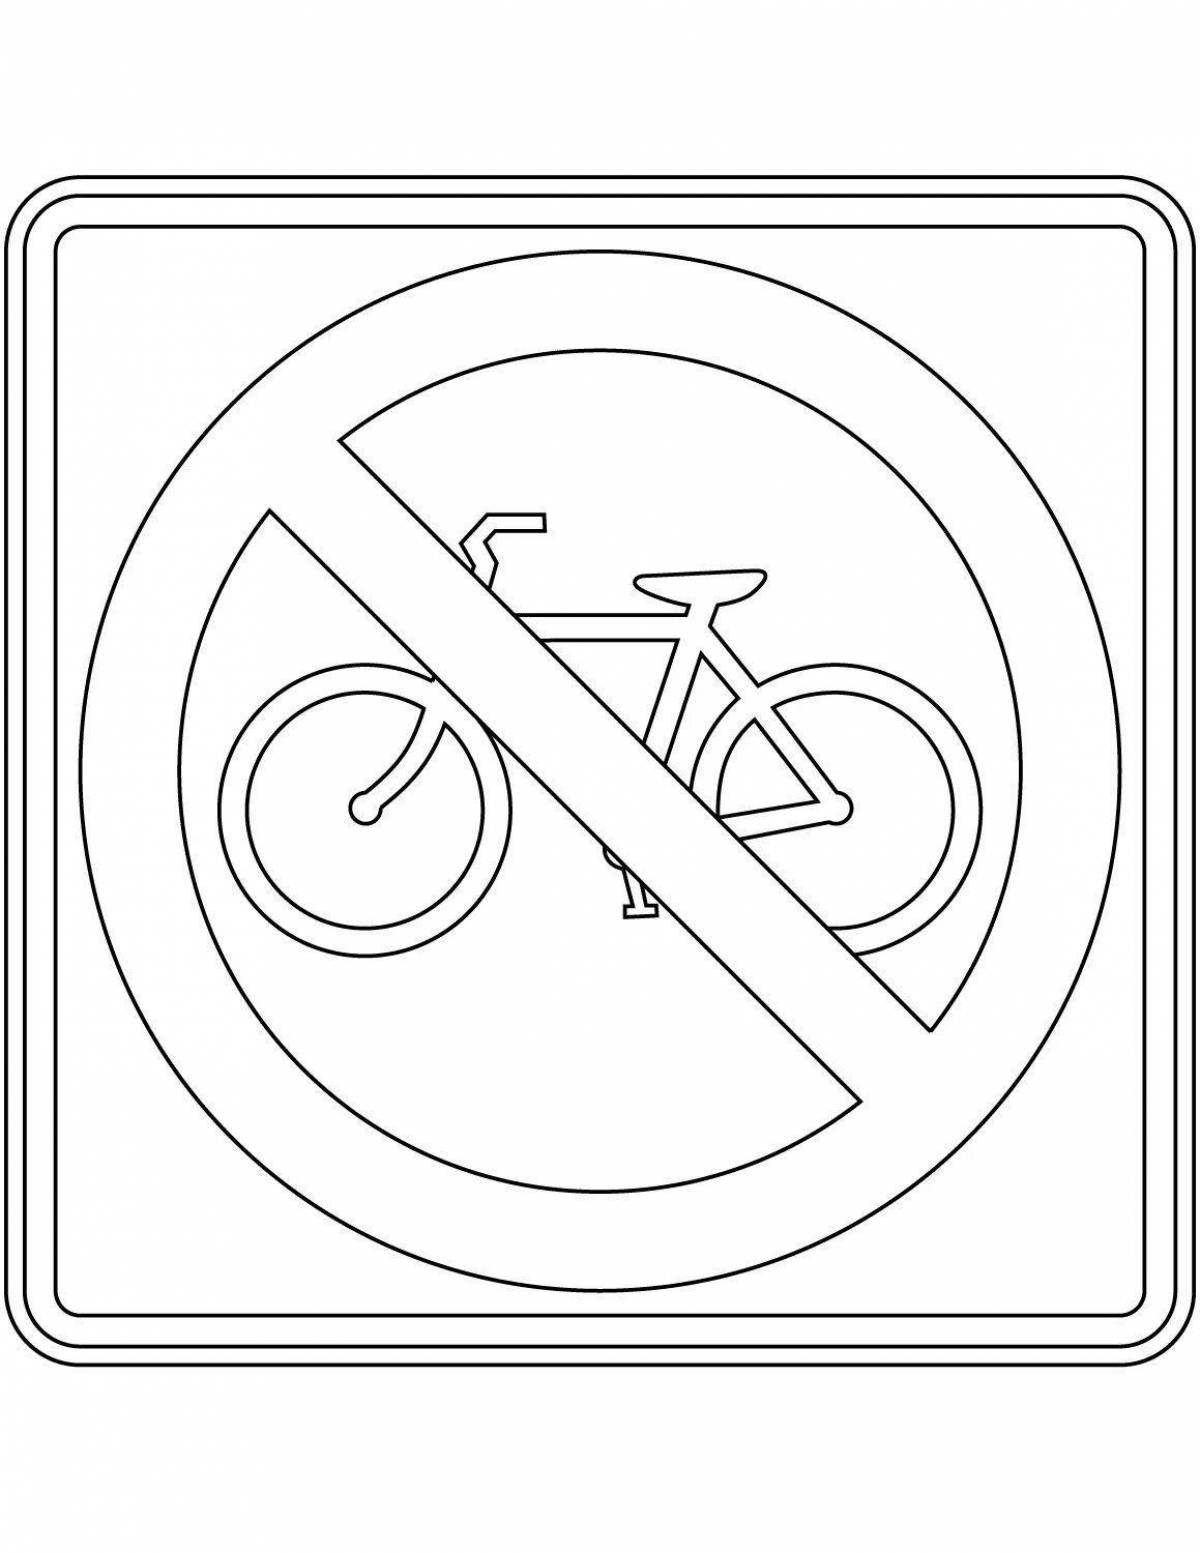 Interactive road signs coloring book for kids